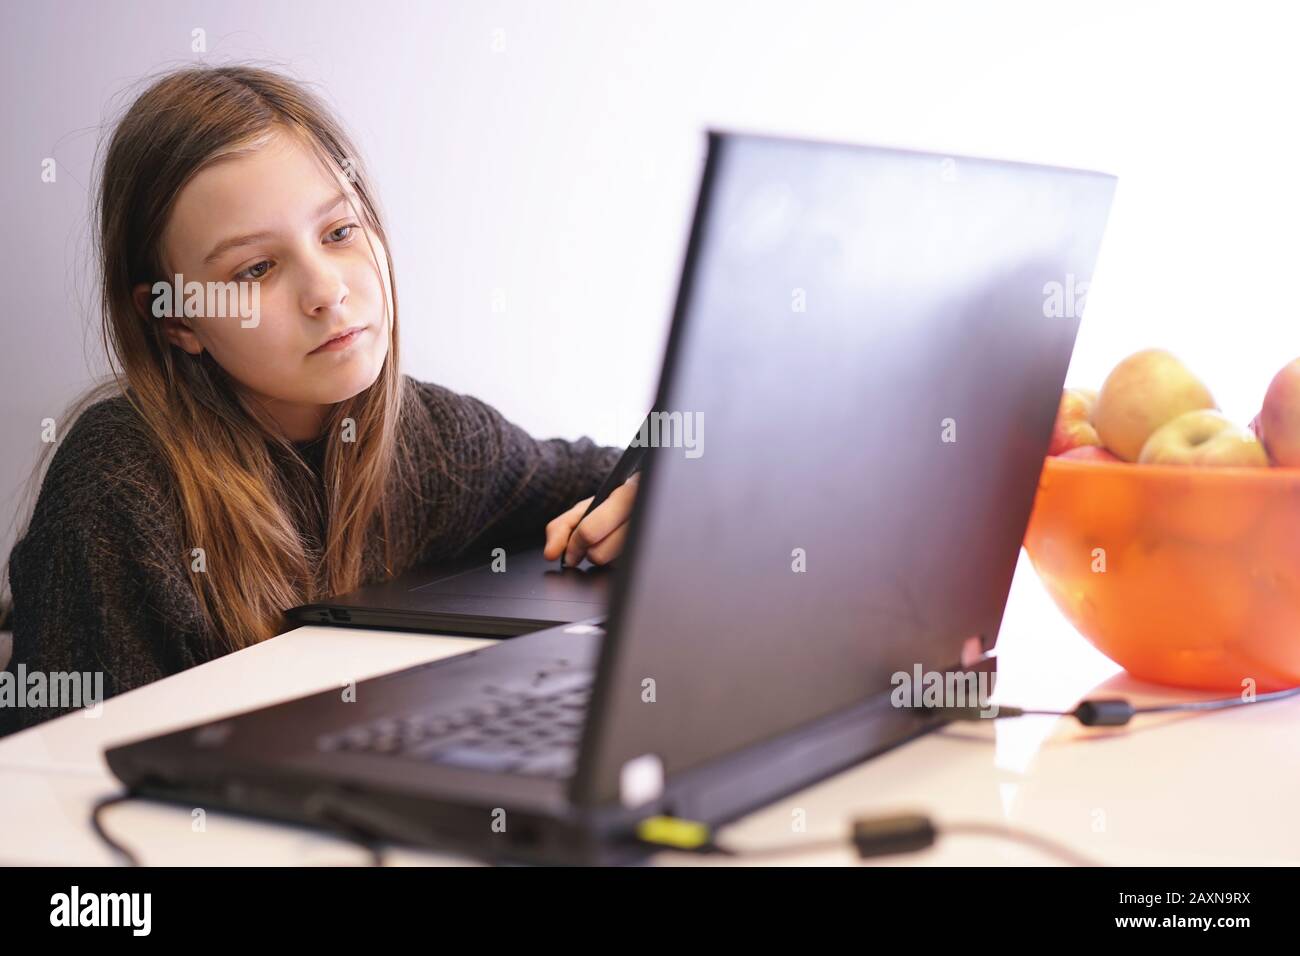 girl at home learns to draw on the laptop using a tablet and pen Stock Photo